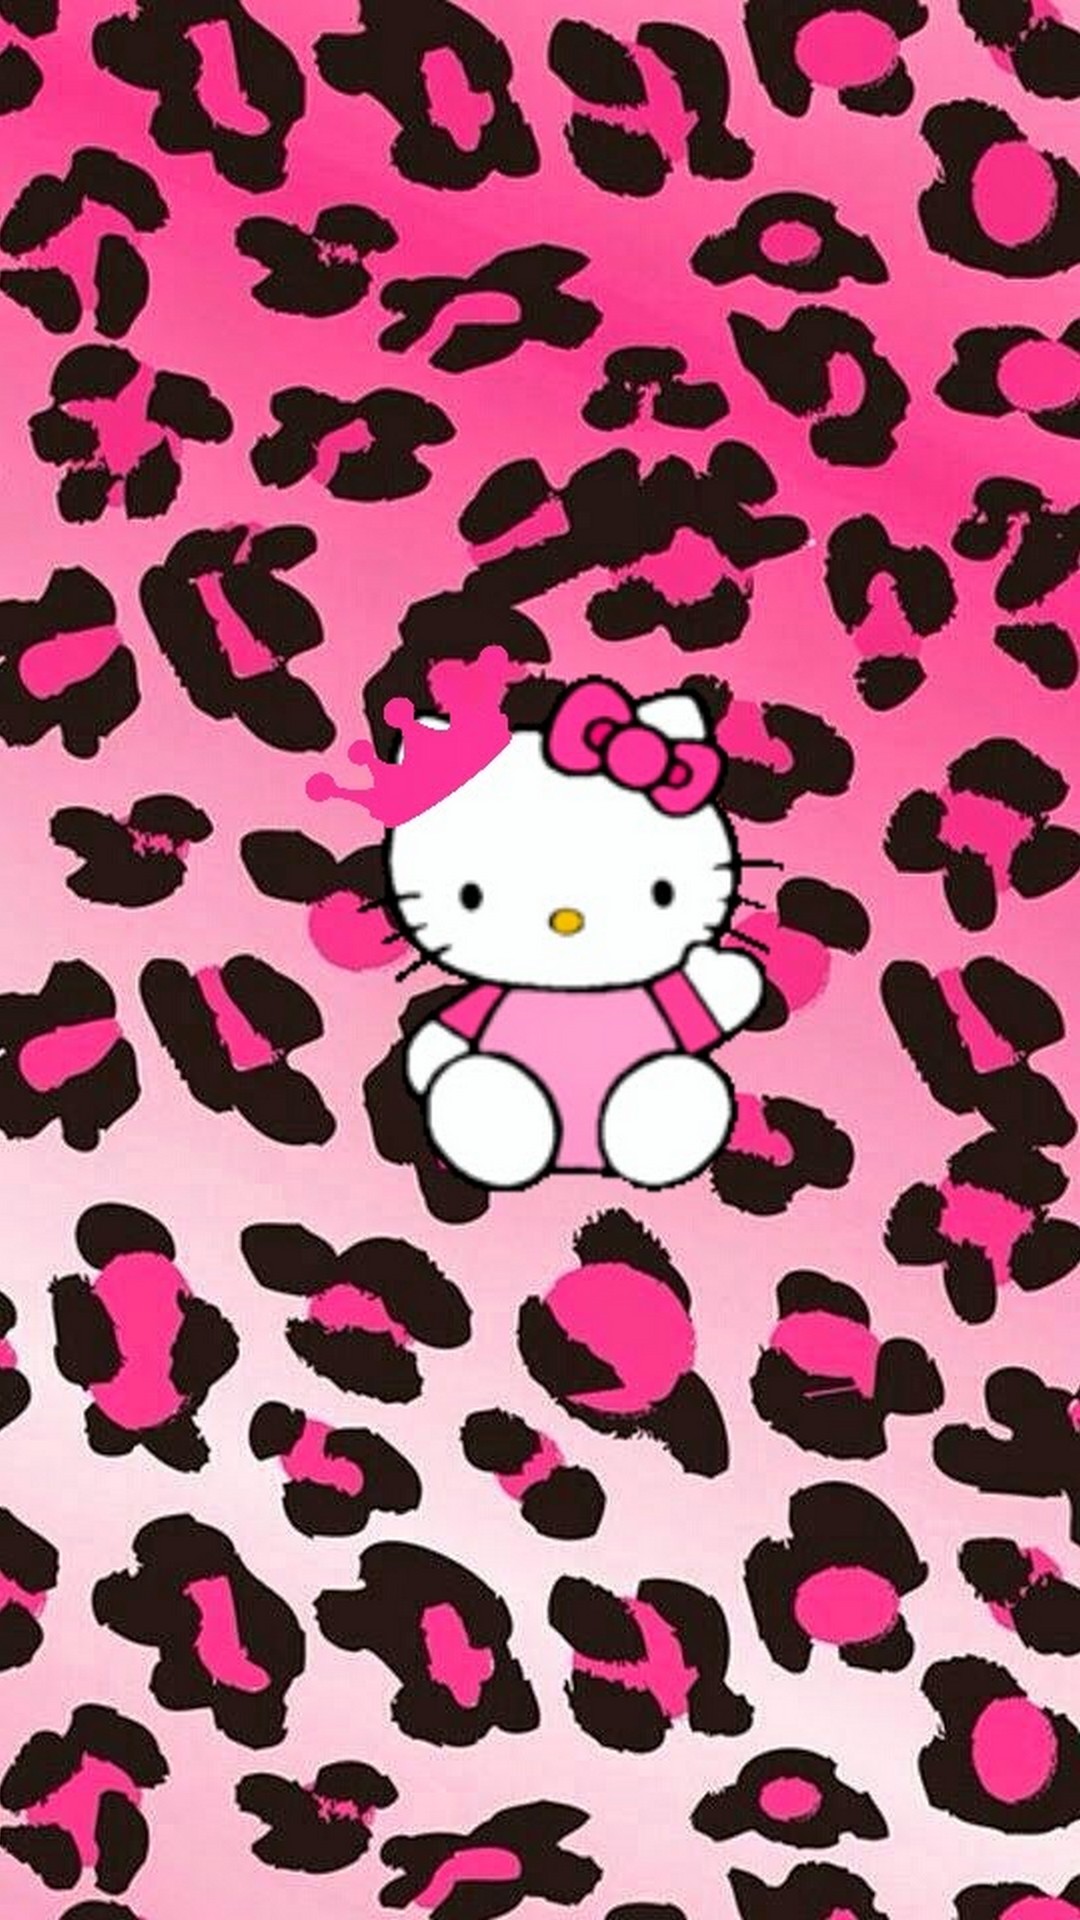 Wallpaper Sanrio Hello Kitty iPhone with image resolution 1080x1920 pixel. You can make this wallpaper for your iPhone 5, 6, 7, 8, X backgrounds, Mobile Screensaver, or iPad Lock Screen